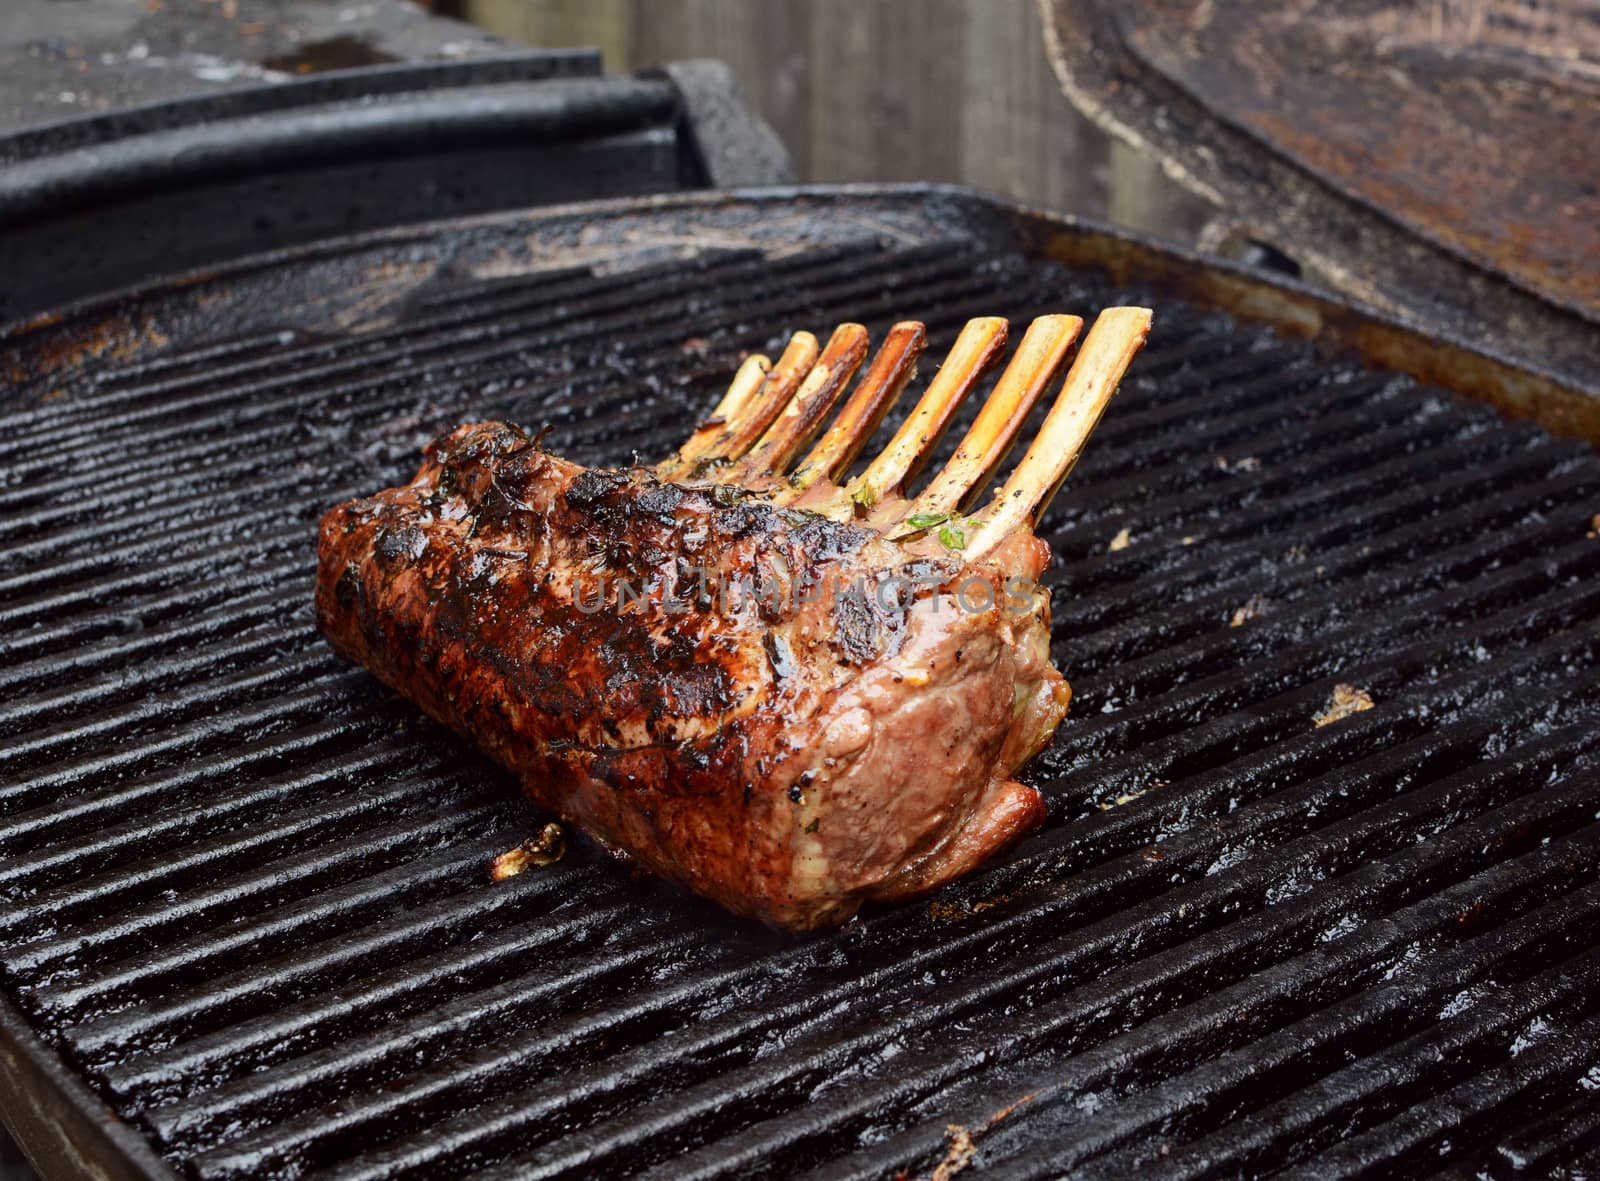 Juicy rack of lamb with seven ribs grilling on a summer barbecue